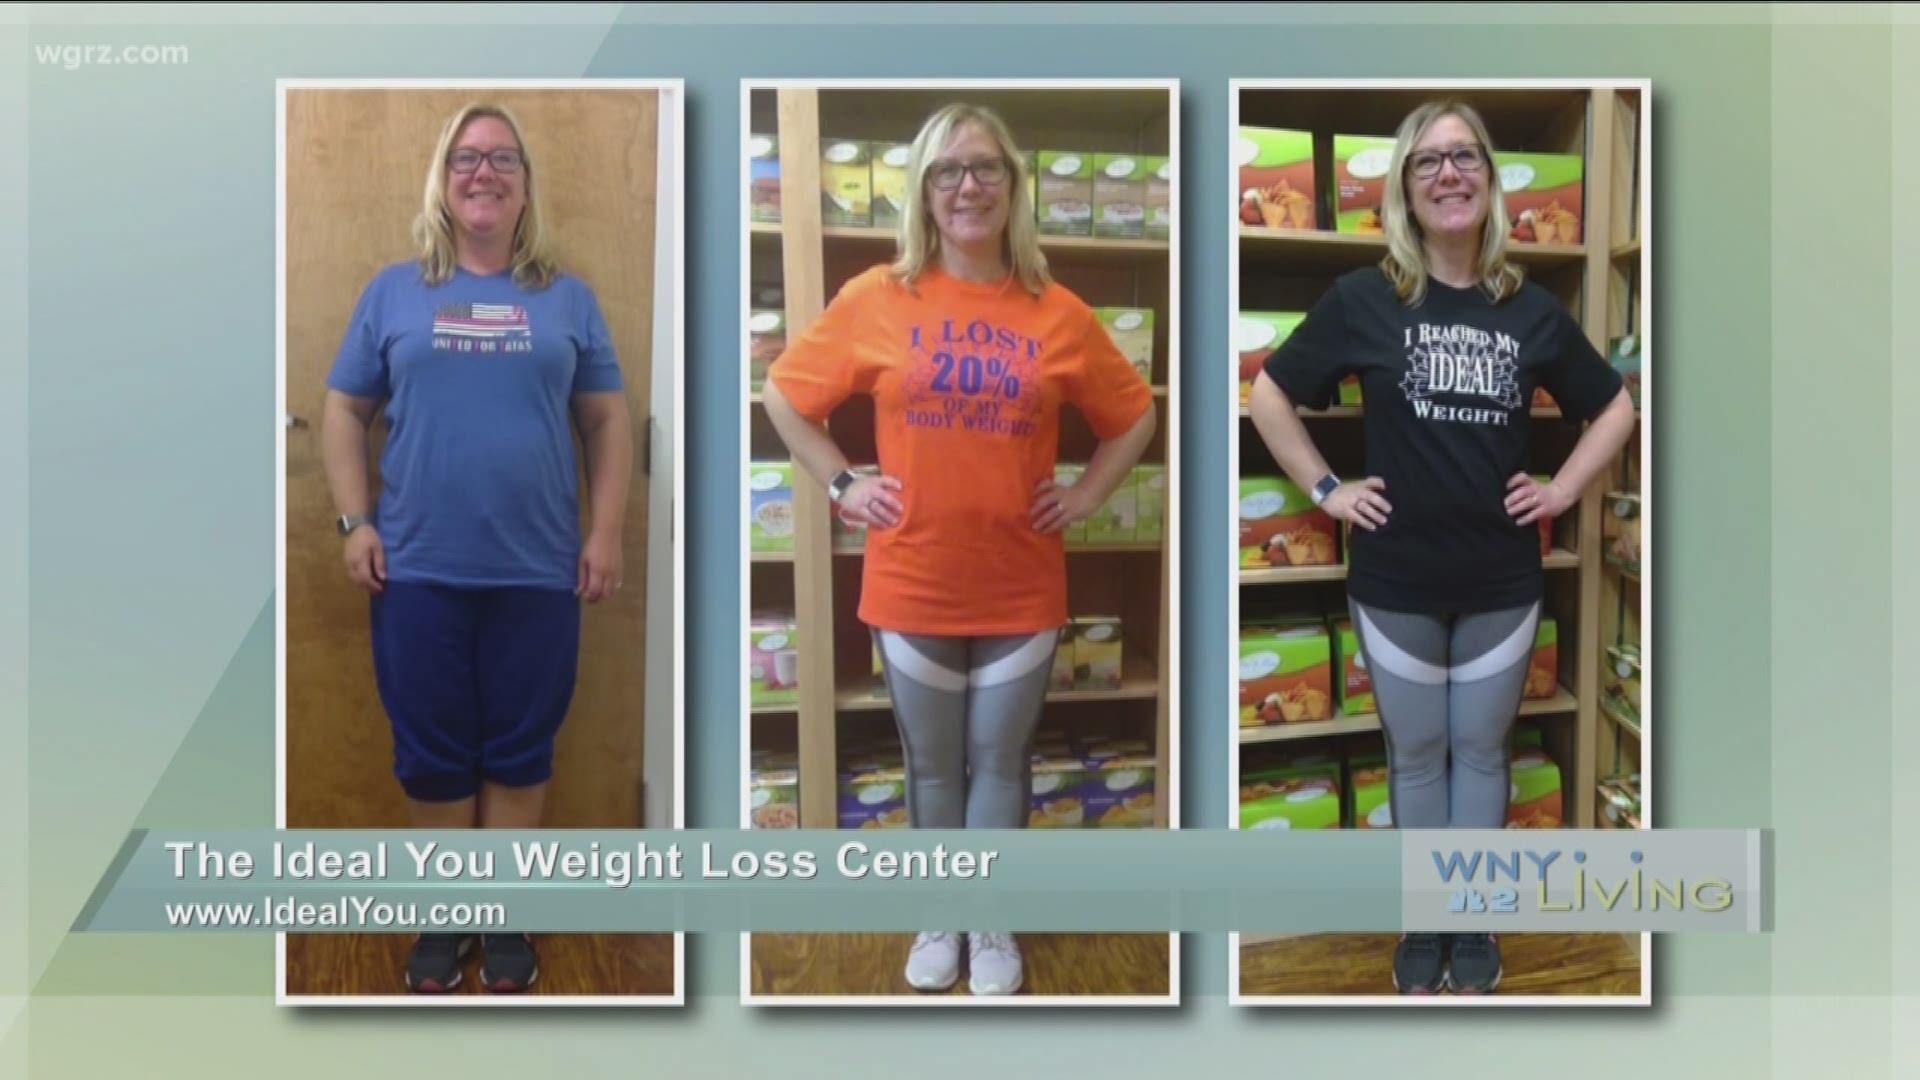 WNY Living - May 11 - The Ideal You Weight Loss Center (SPONSORED CONTENT)